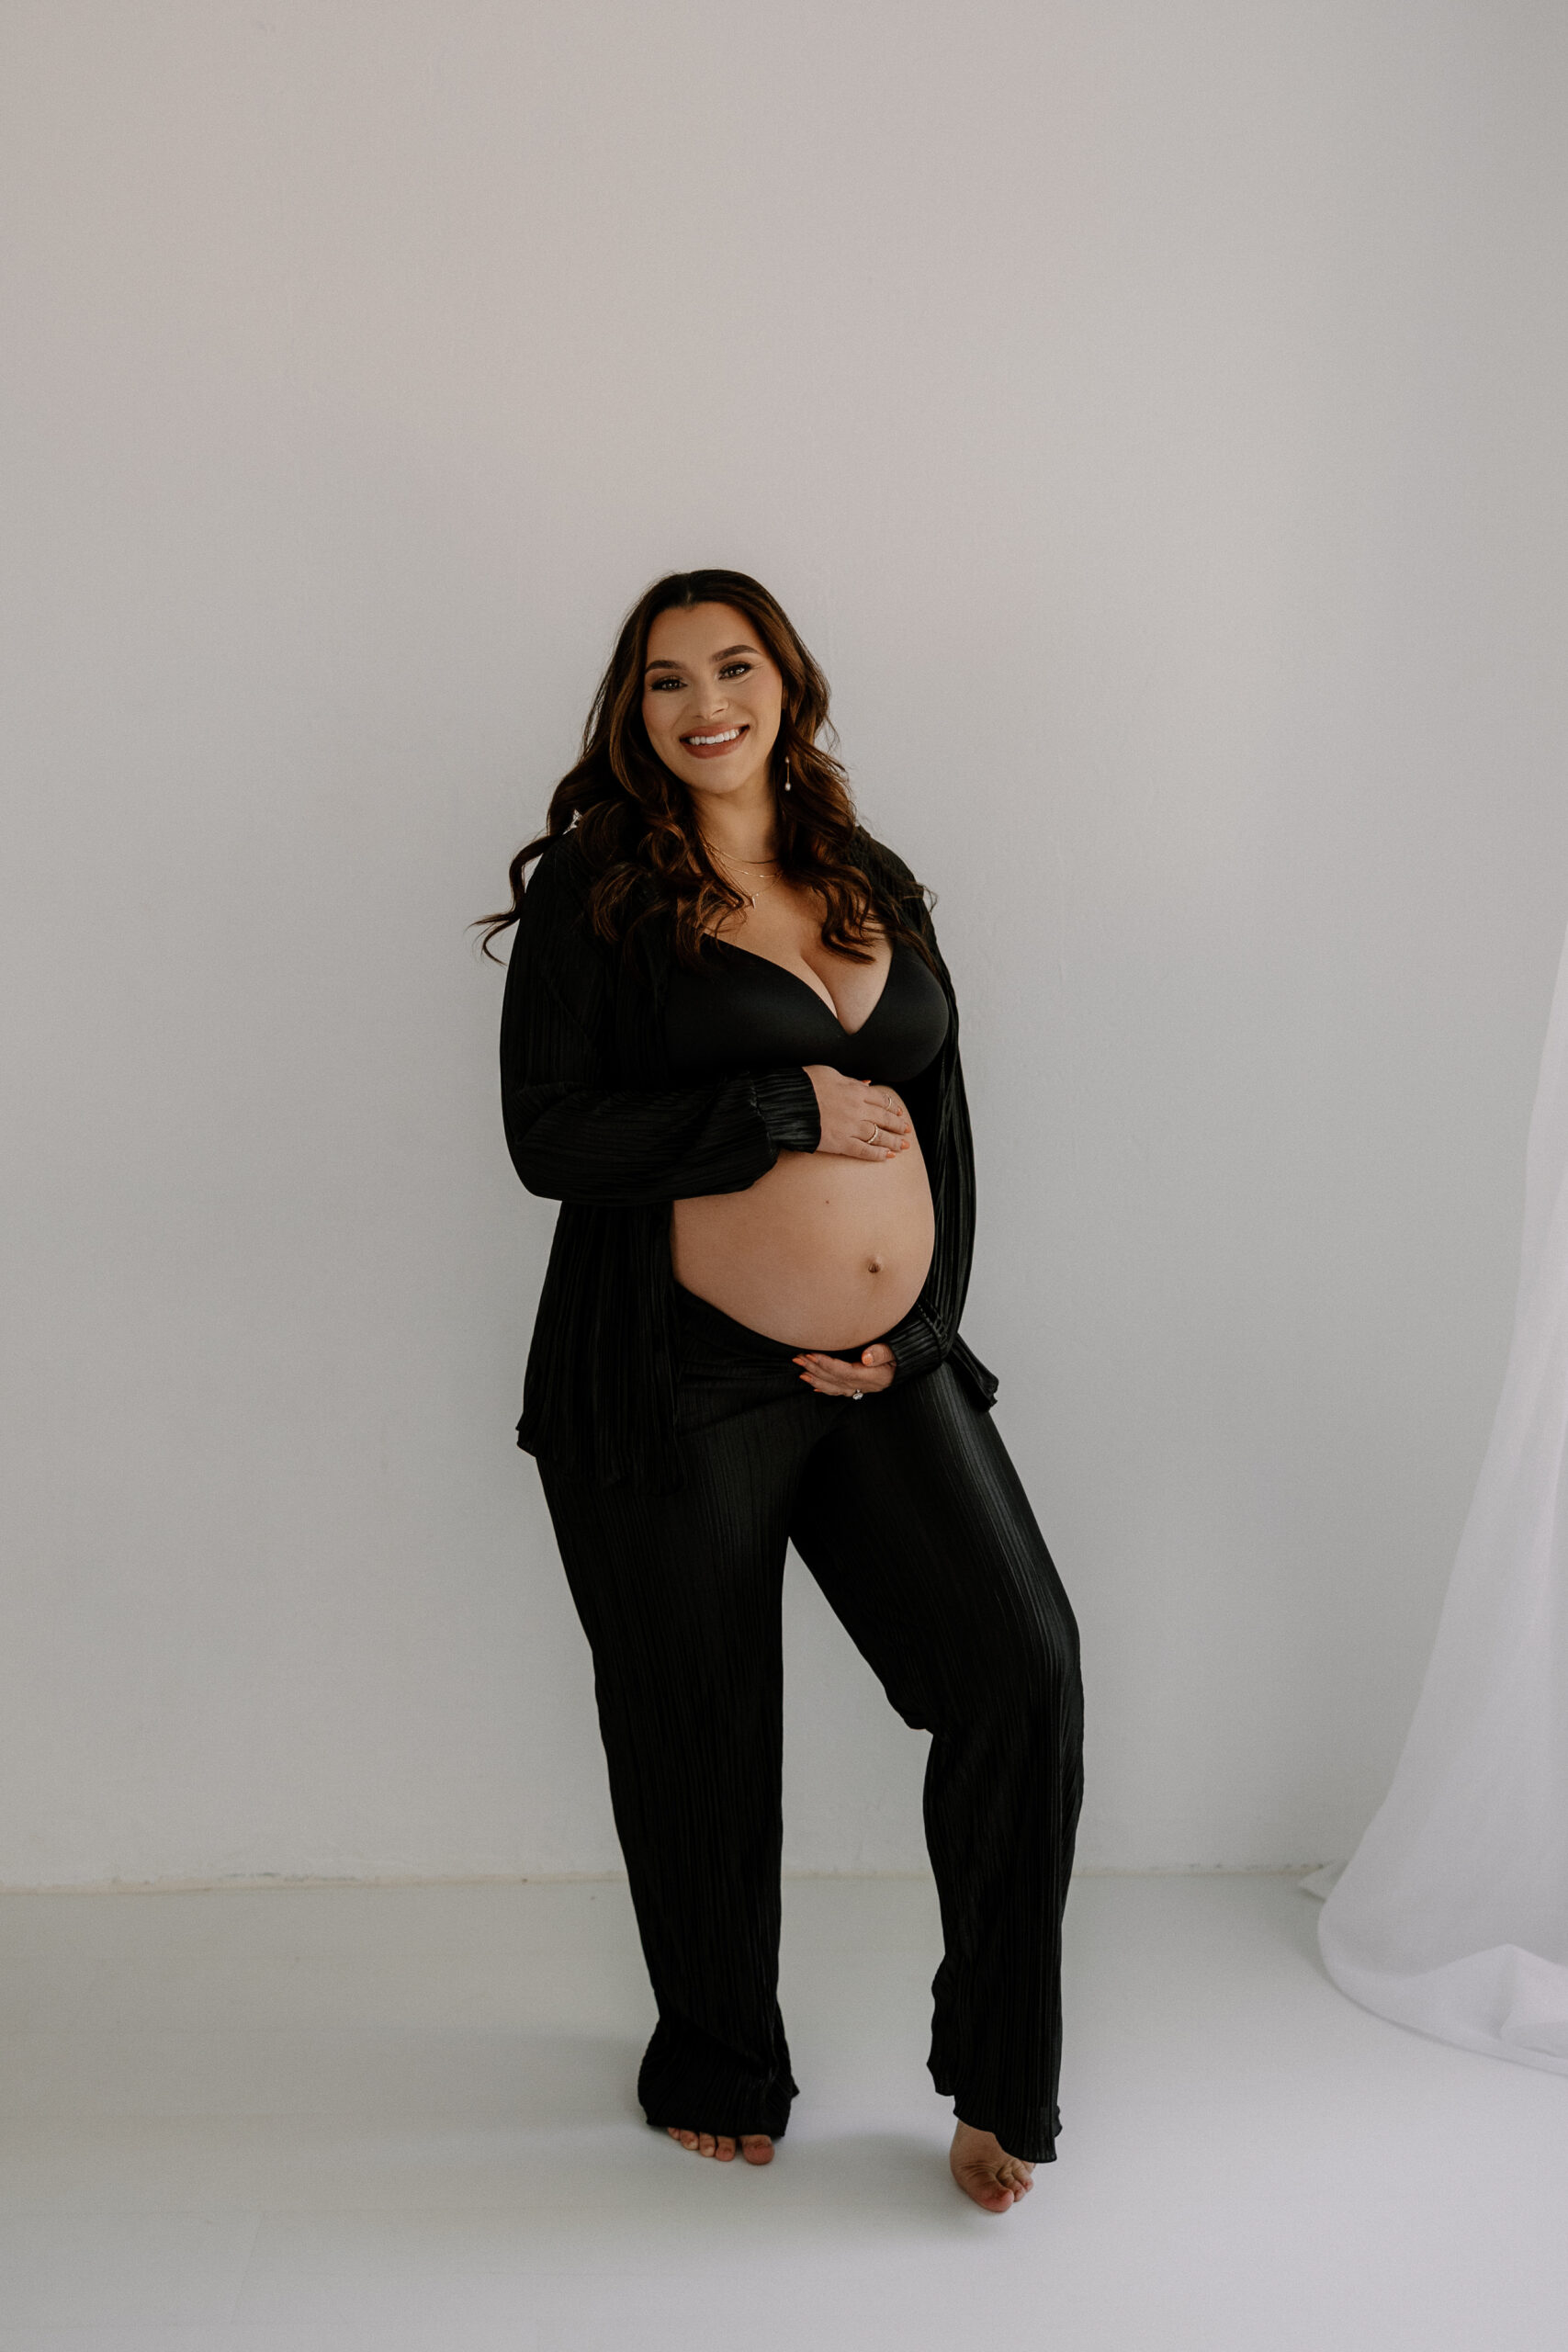 mom to be standing, holding stomach and smiling during editorial maternity photoshoot